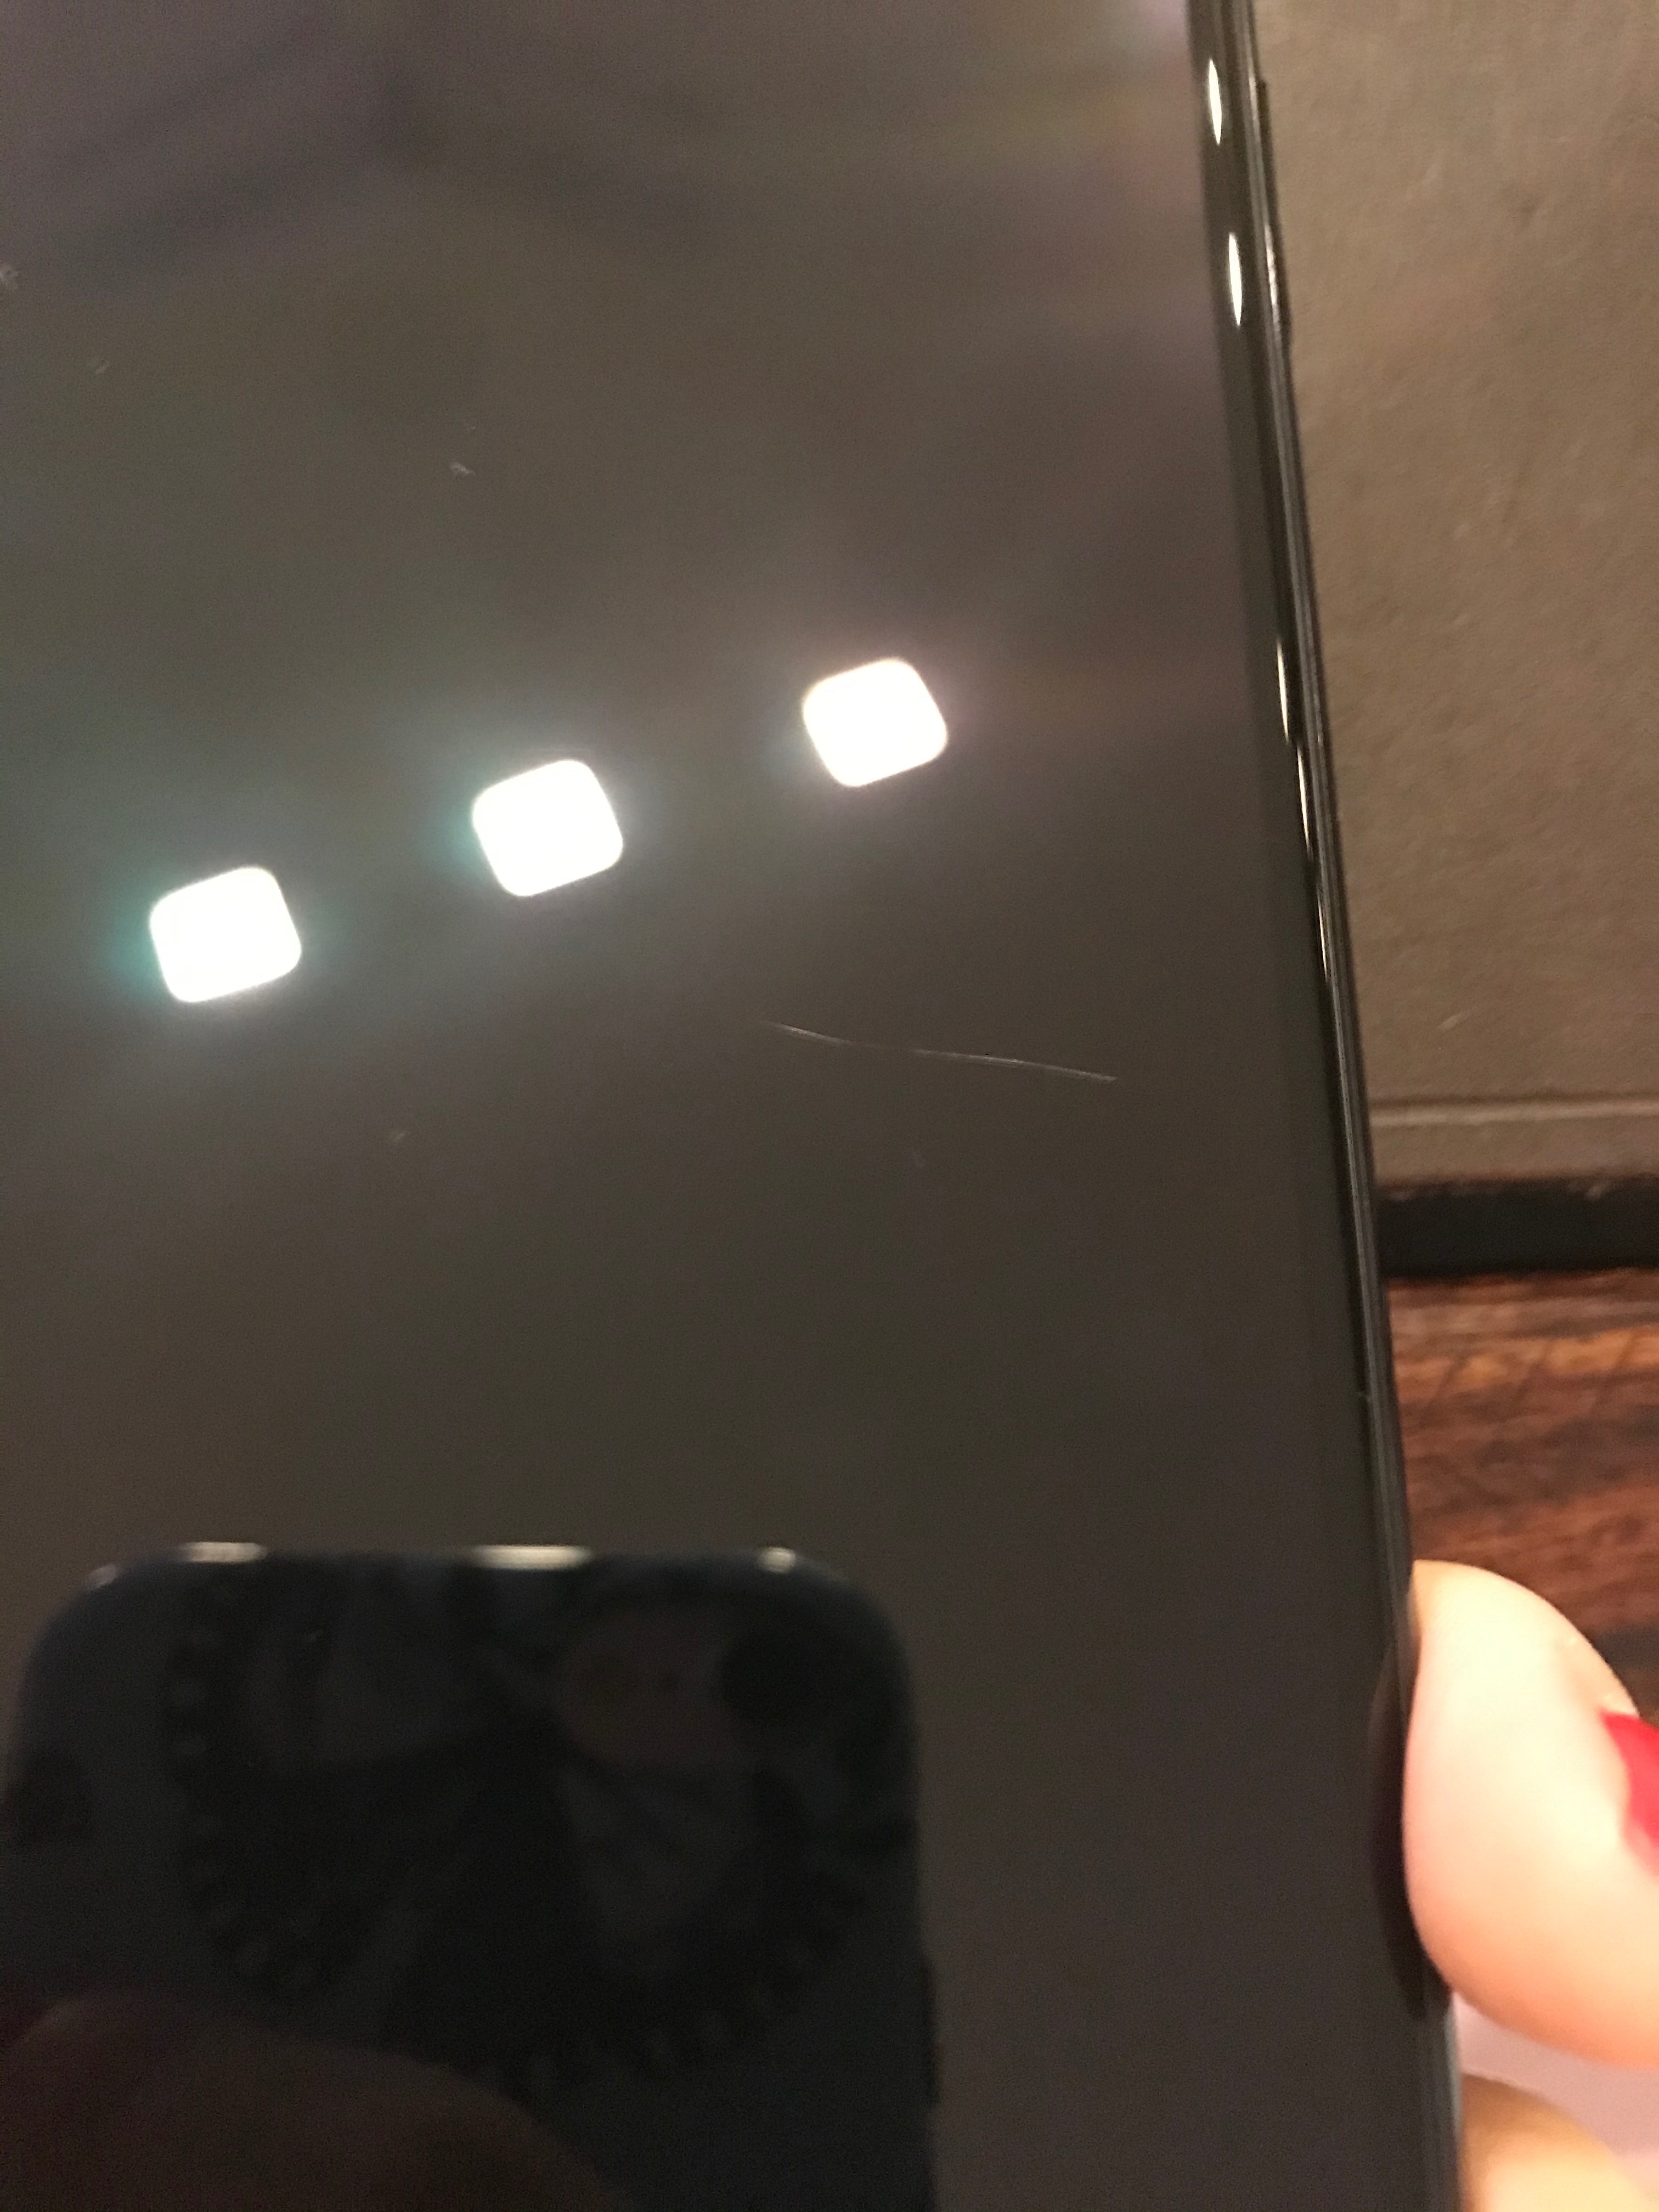 Does Apple replace scratched phones?